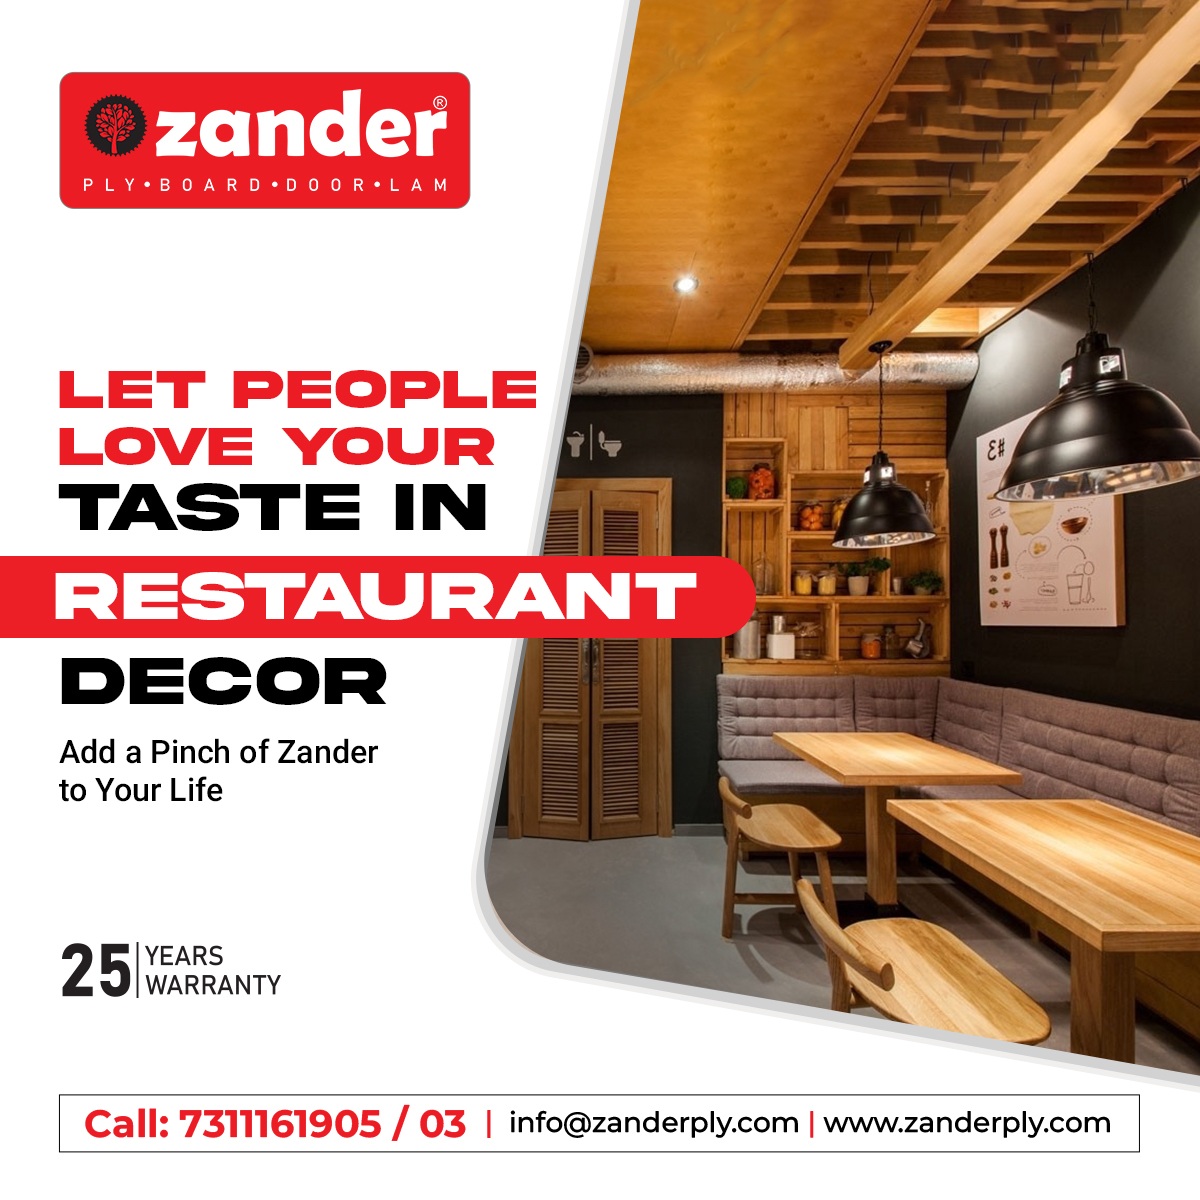 Zander Ply is superior in strength and quality. Decorate your restaurant with the confidence of Zander and let people go wow over it.

#Zanderply #RestaurantsDecoration #Decoration
#RestaurantInterior #InteriorDecoration #RestaurantDecor #Plywood #PlywoodDesigner #InteriorDecor